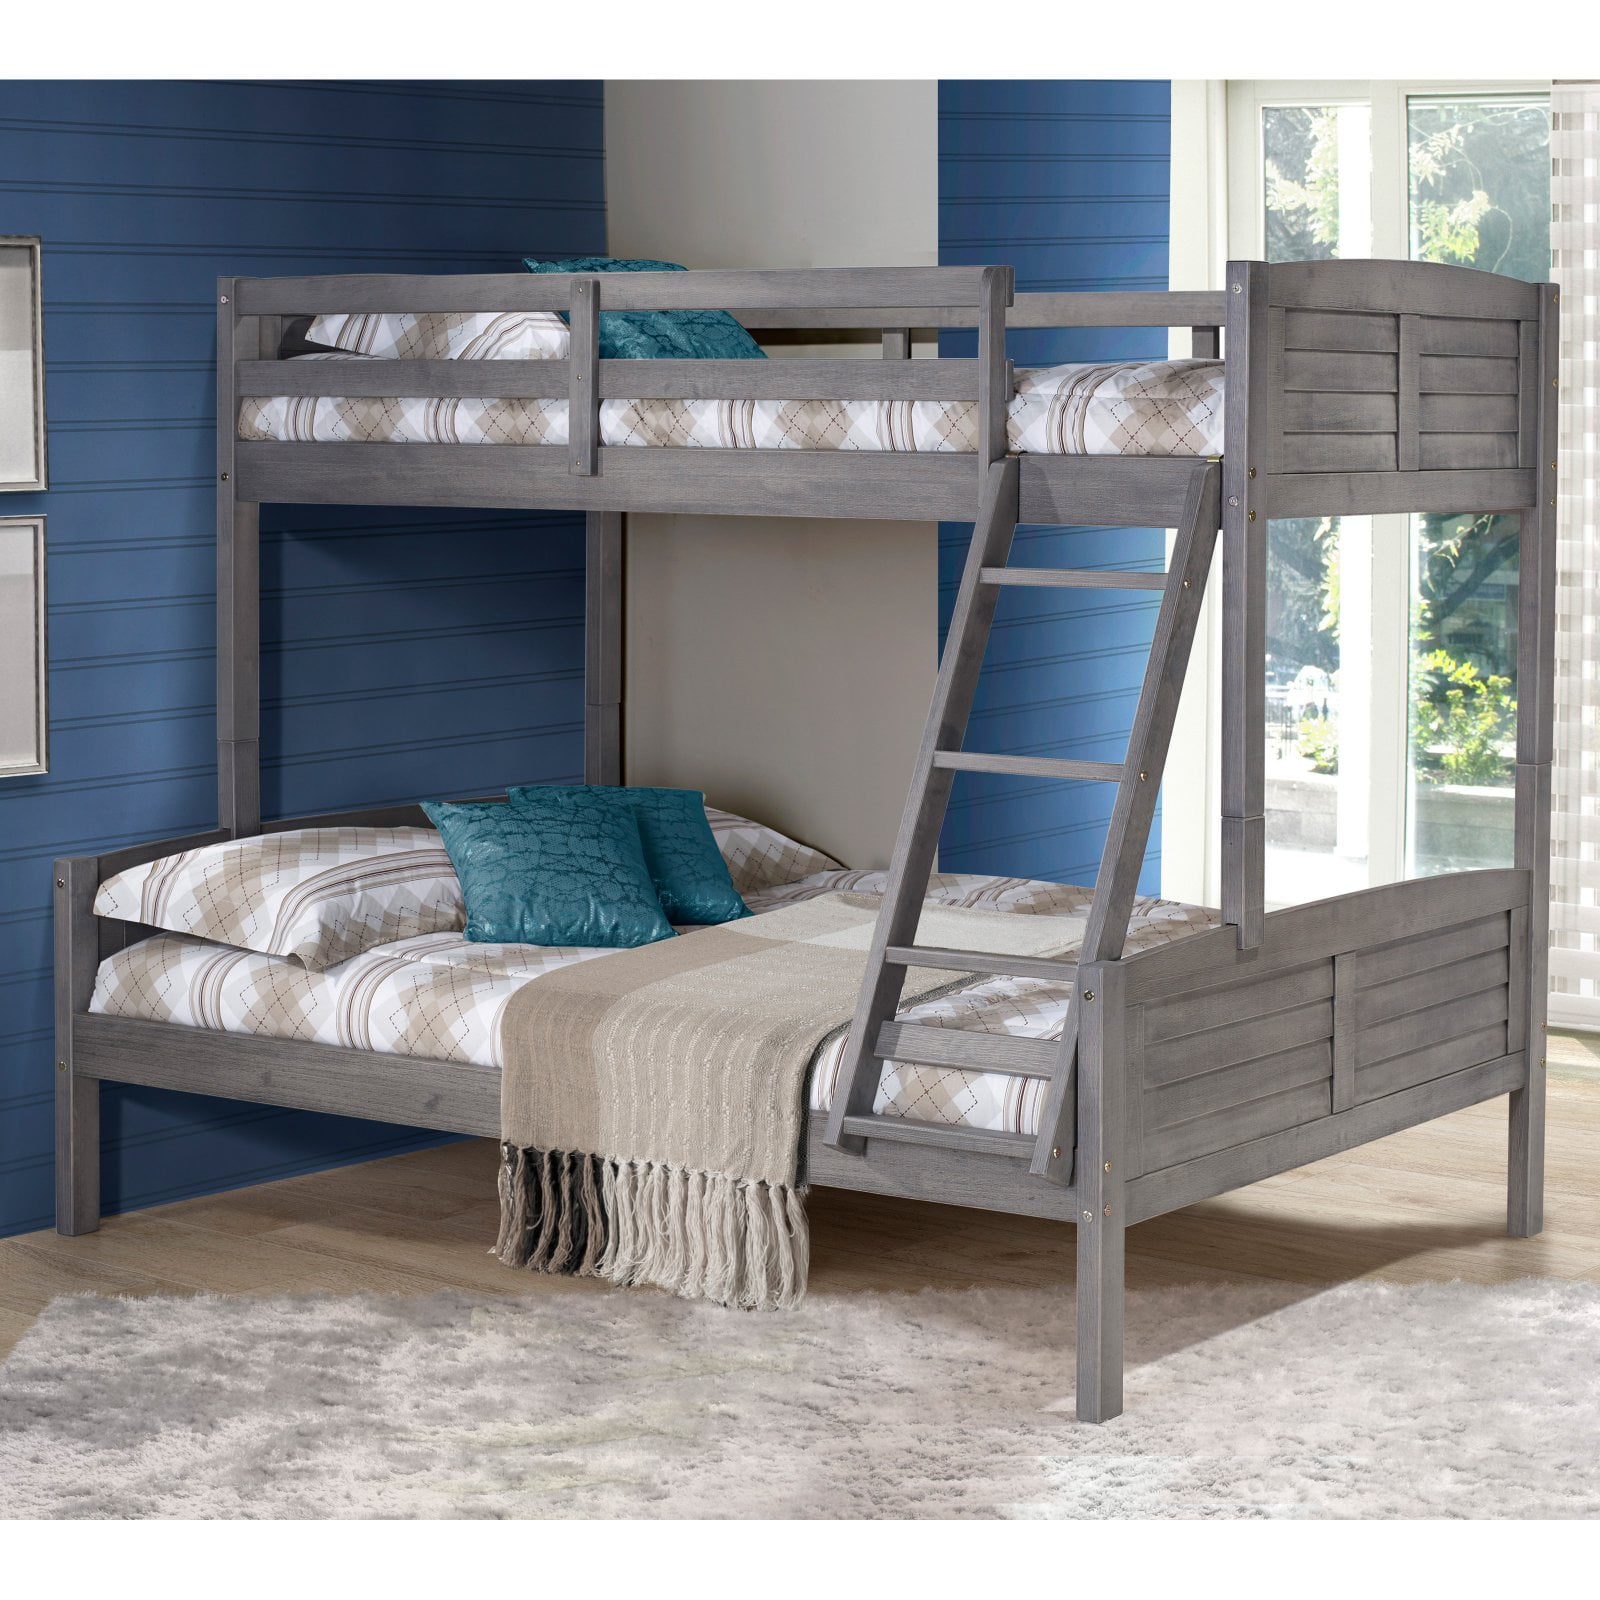 Donco Kids Louver Wood Bunk Bed Twin, Grey Bunk Beds